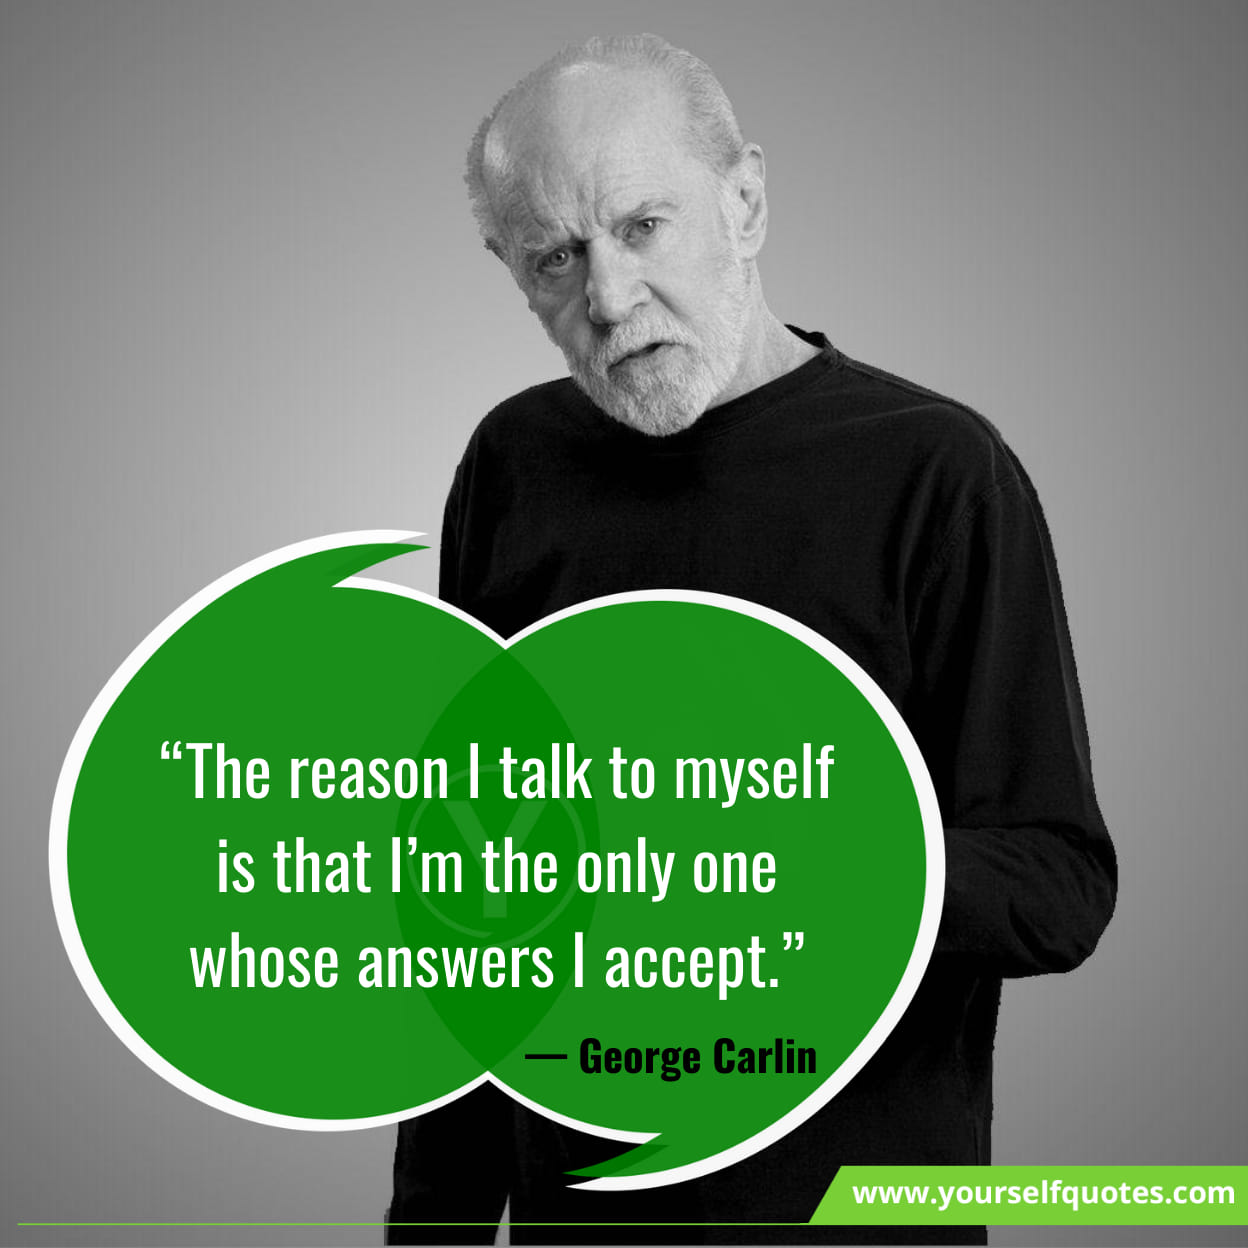 George Carlin Motivational Quotes